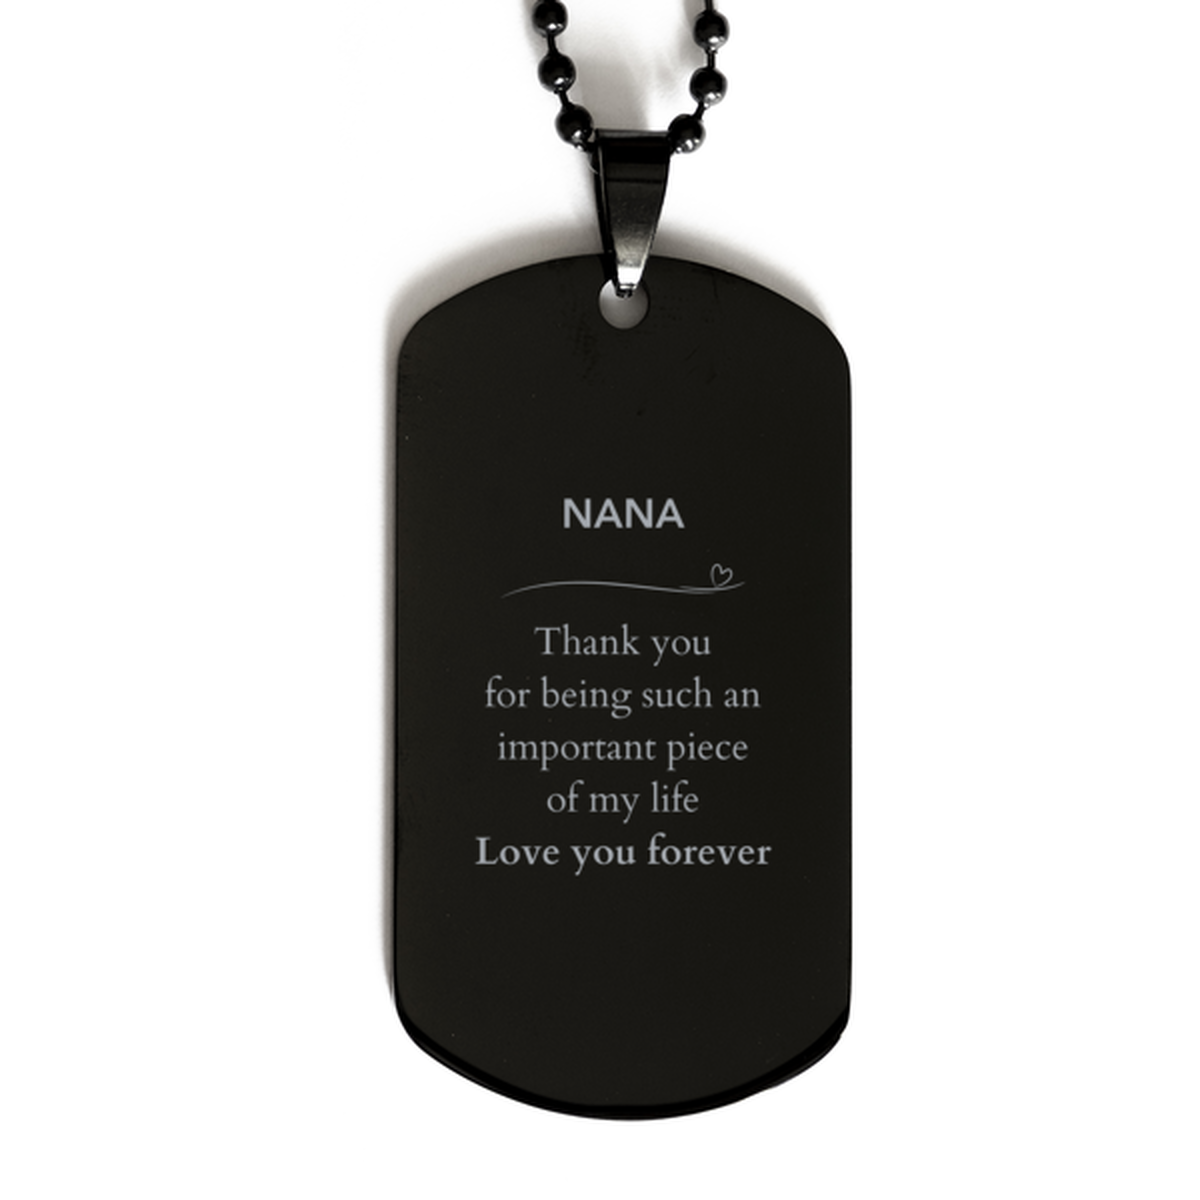 Appropriate Nana Black Dog Tag Epic Birthday Gifts for Nana Thank you for being such an important piece of my life Nana Christmas Mothers Fathers Day